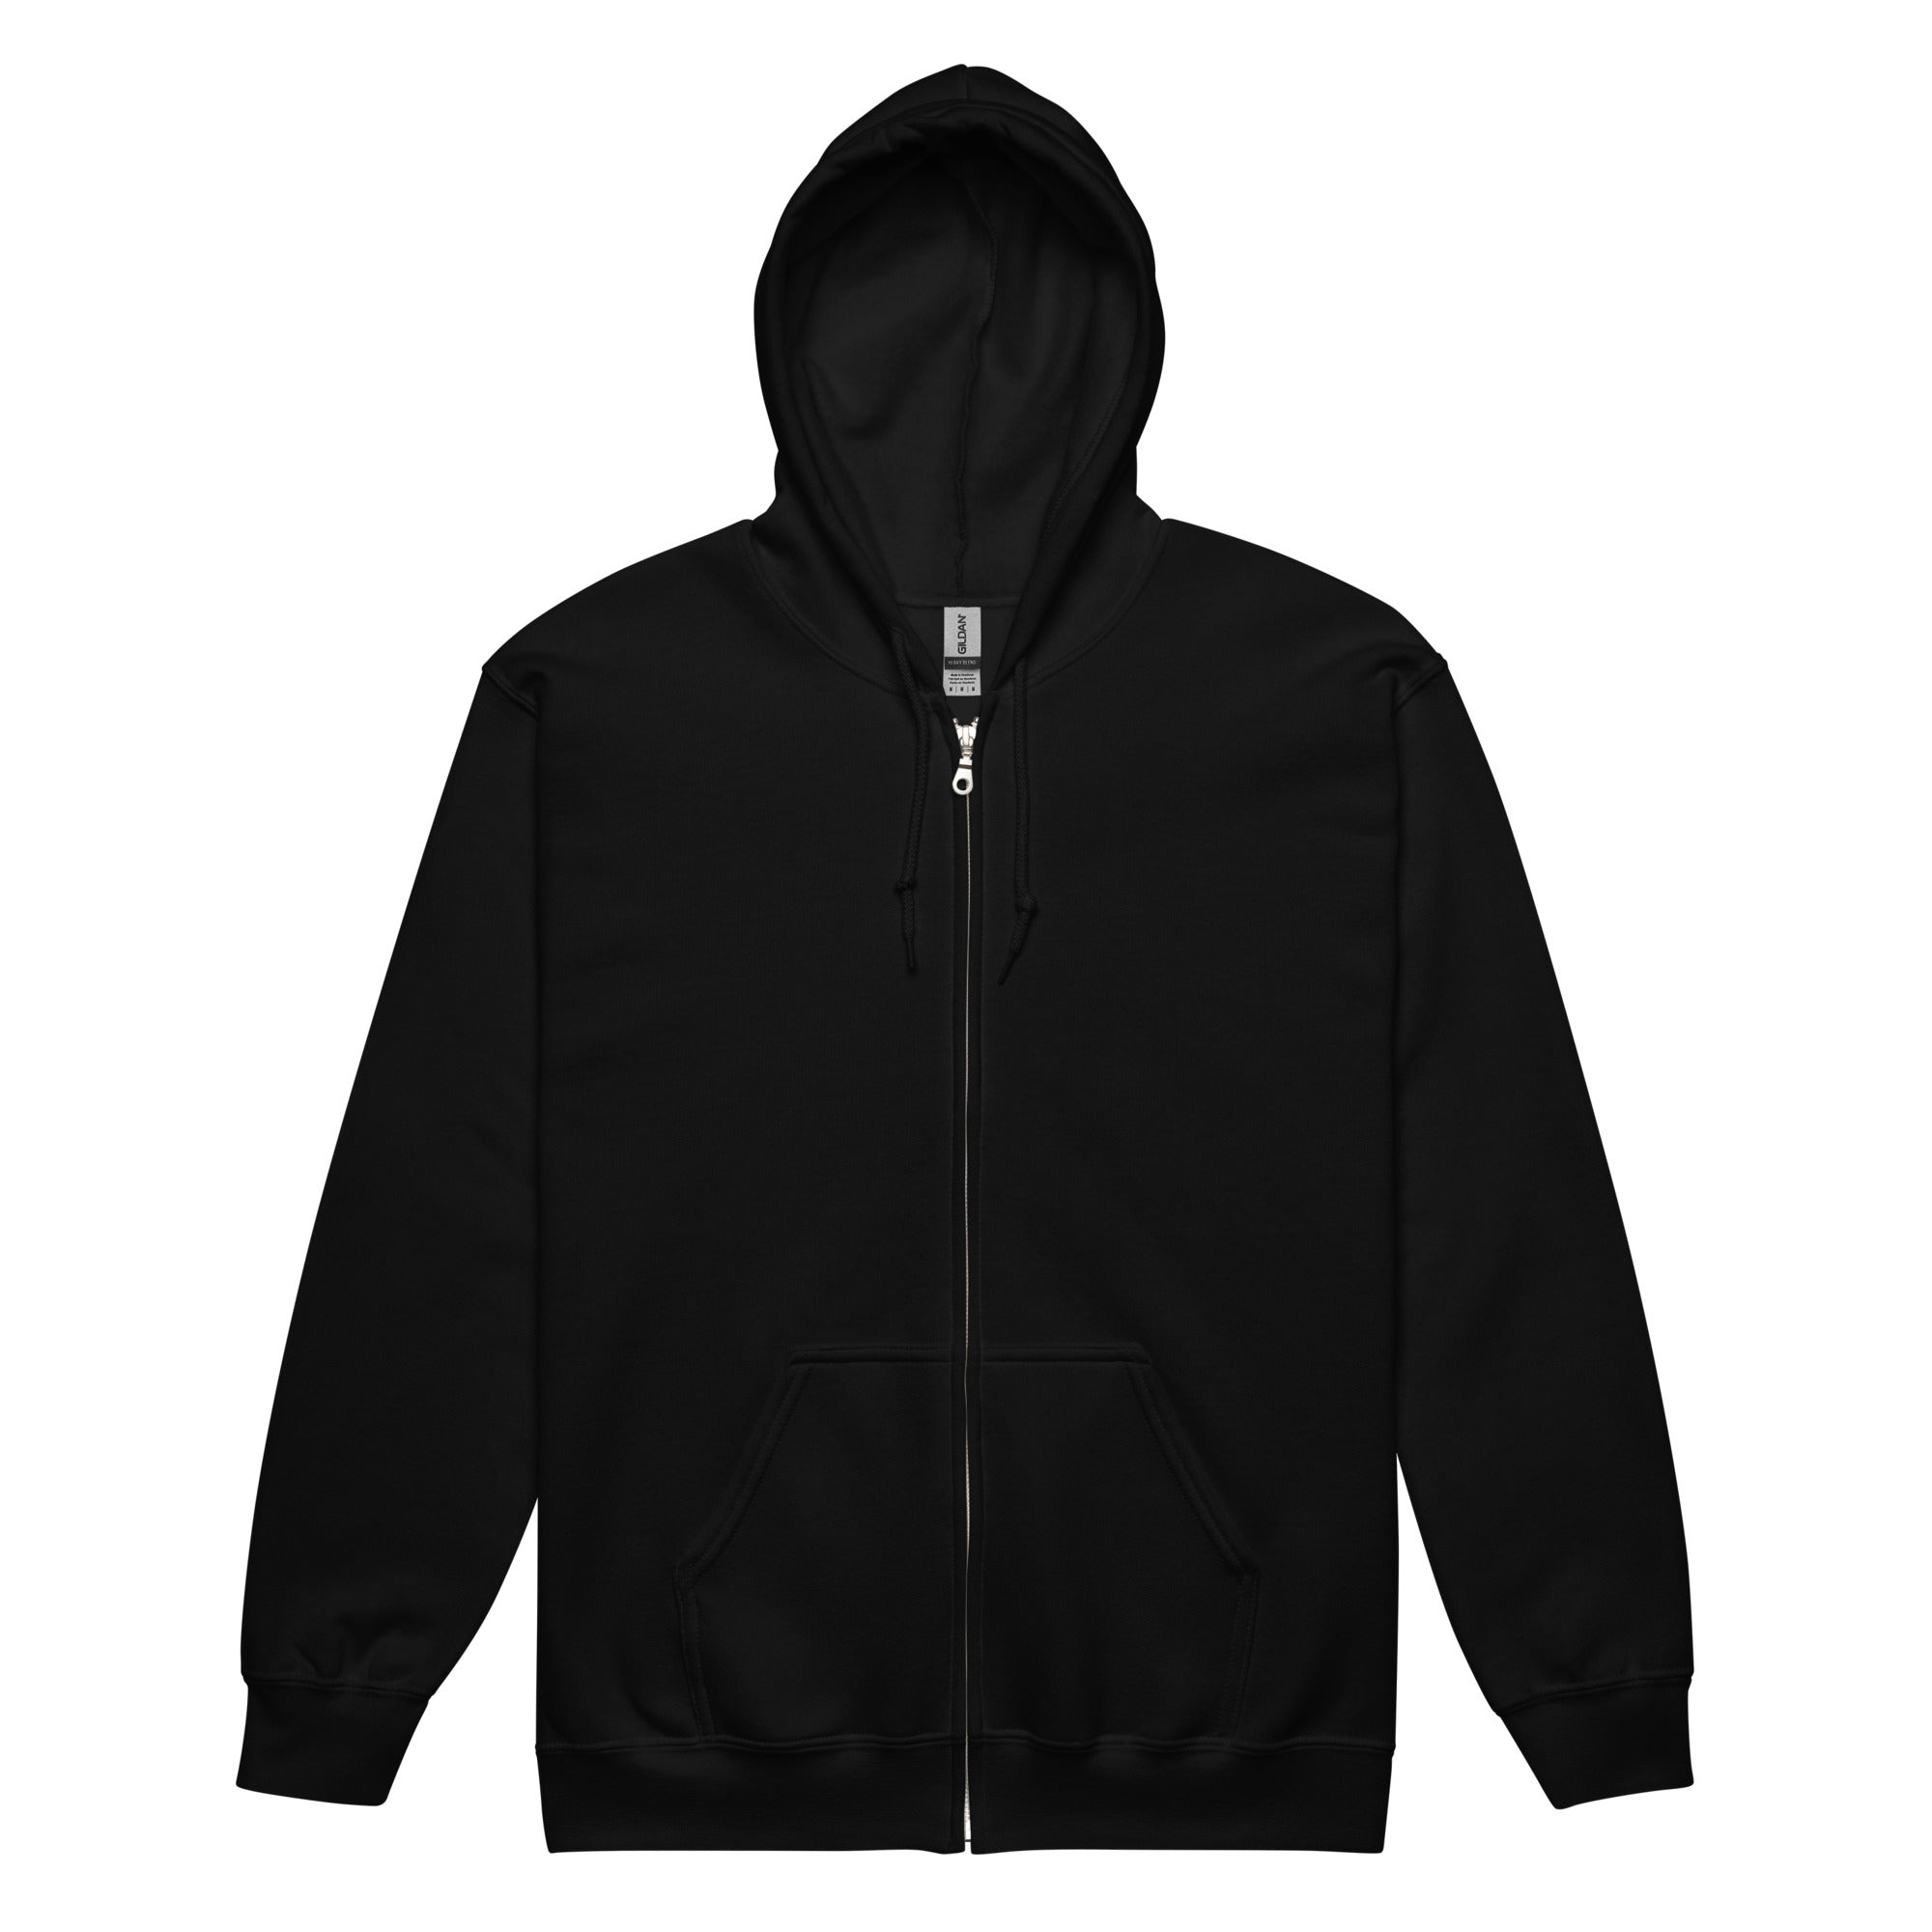 "You Can Find Me In The Pool" blend zip hoodie